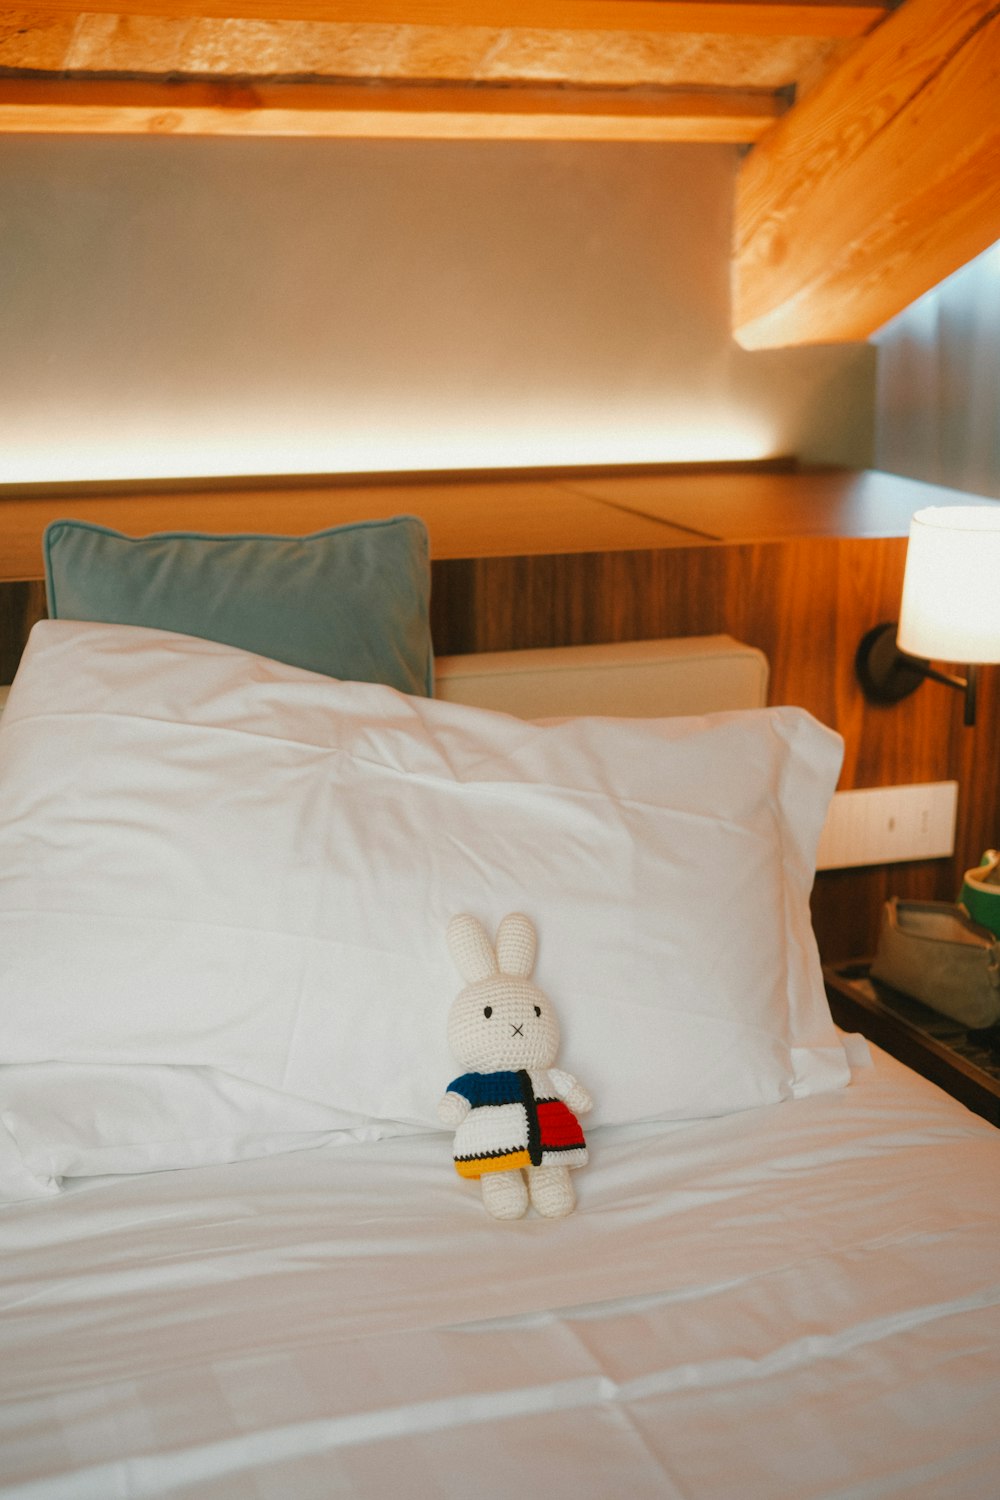 a teddy bear sitting on top of a white bed